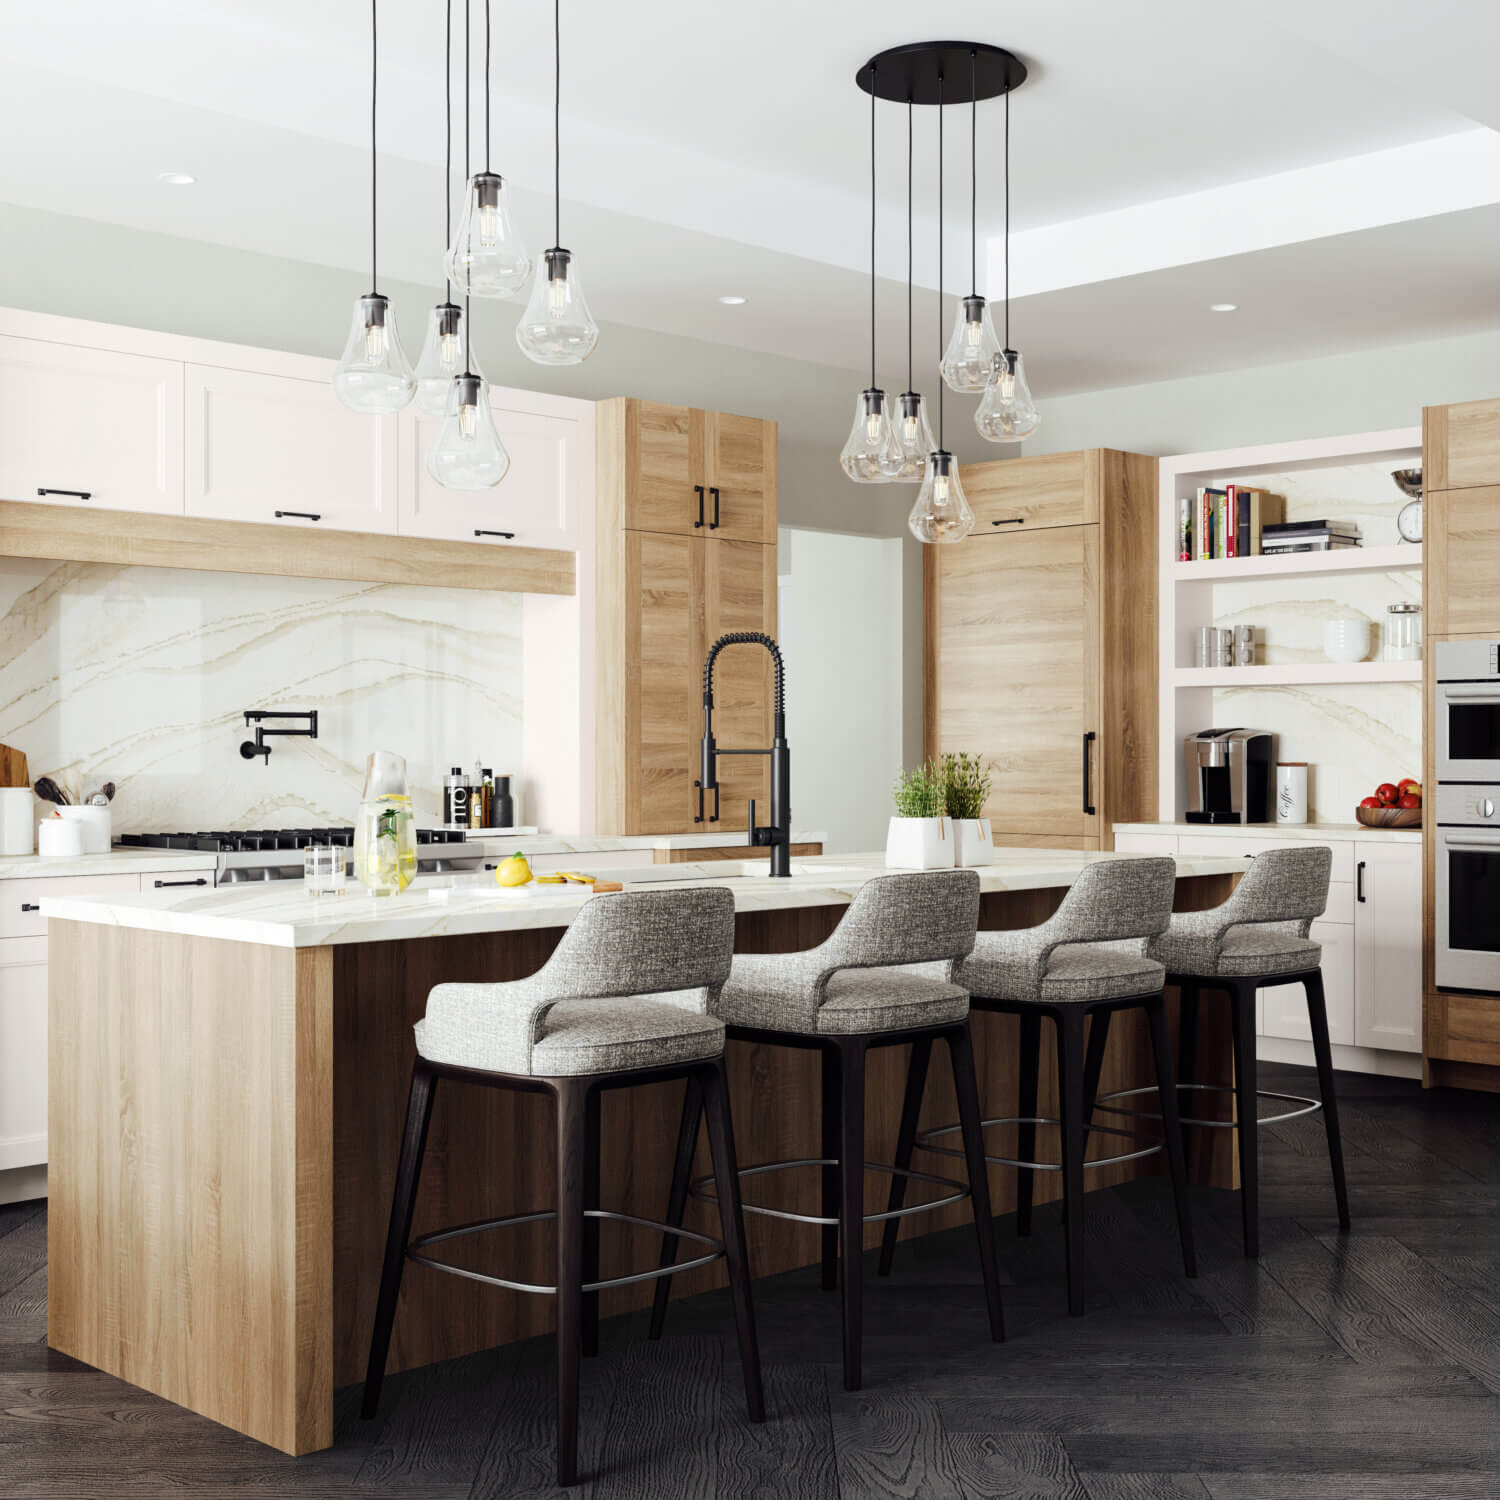 This kitchen is highlighted with a flat panel door style in an off-white painted finish mixed with a slab wood plank door with Lodge Oak texture. The kitchen island offers seating for four and has a kitchen sink that is positioned across from the cooktop.